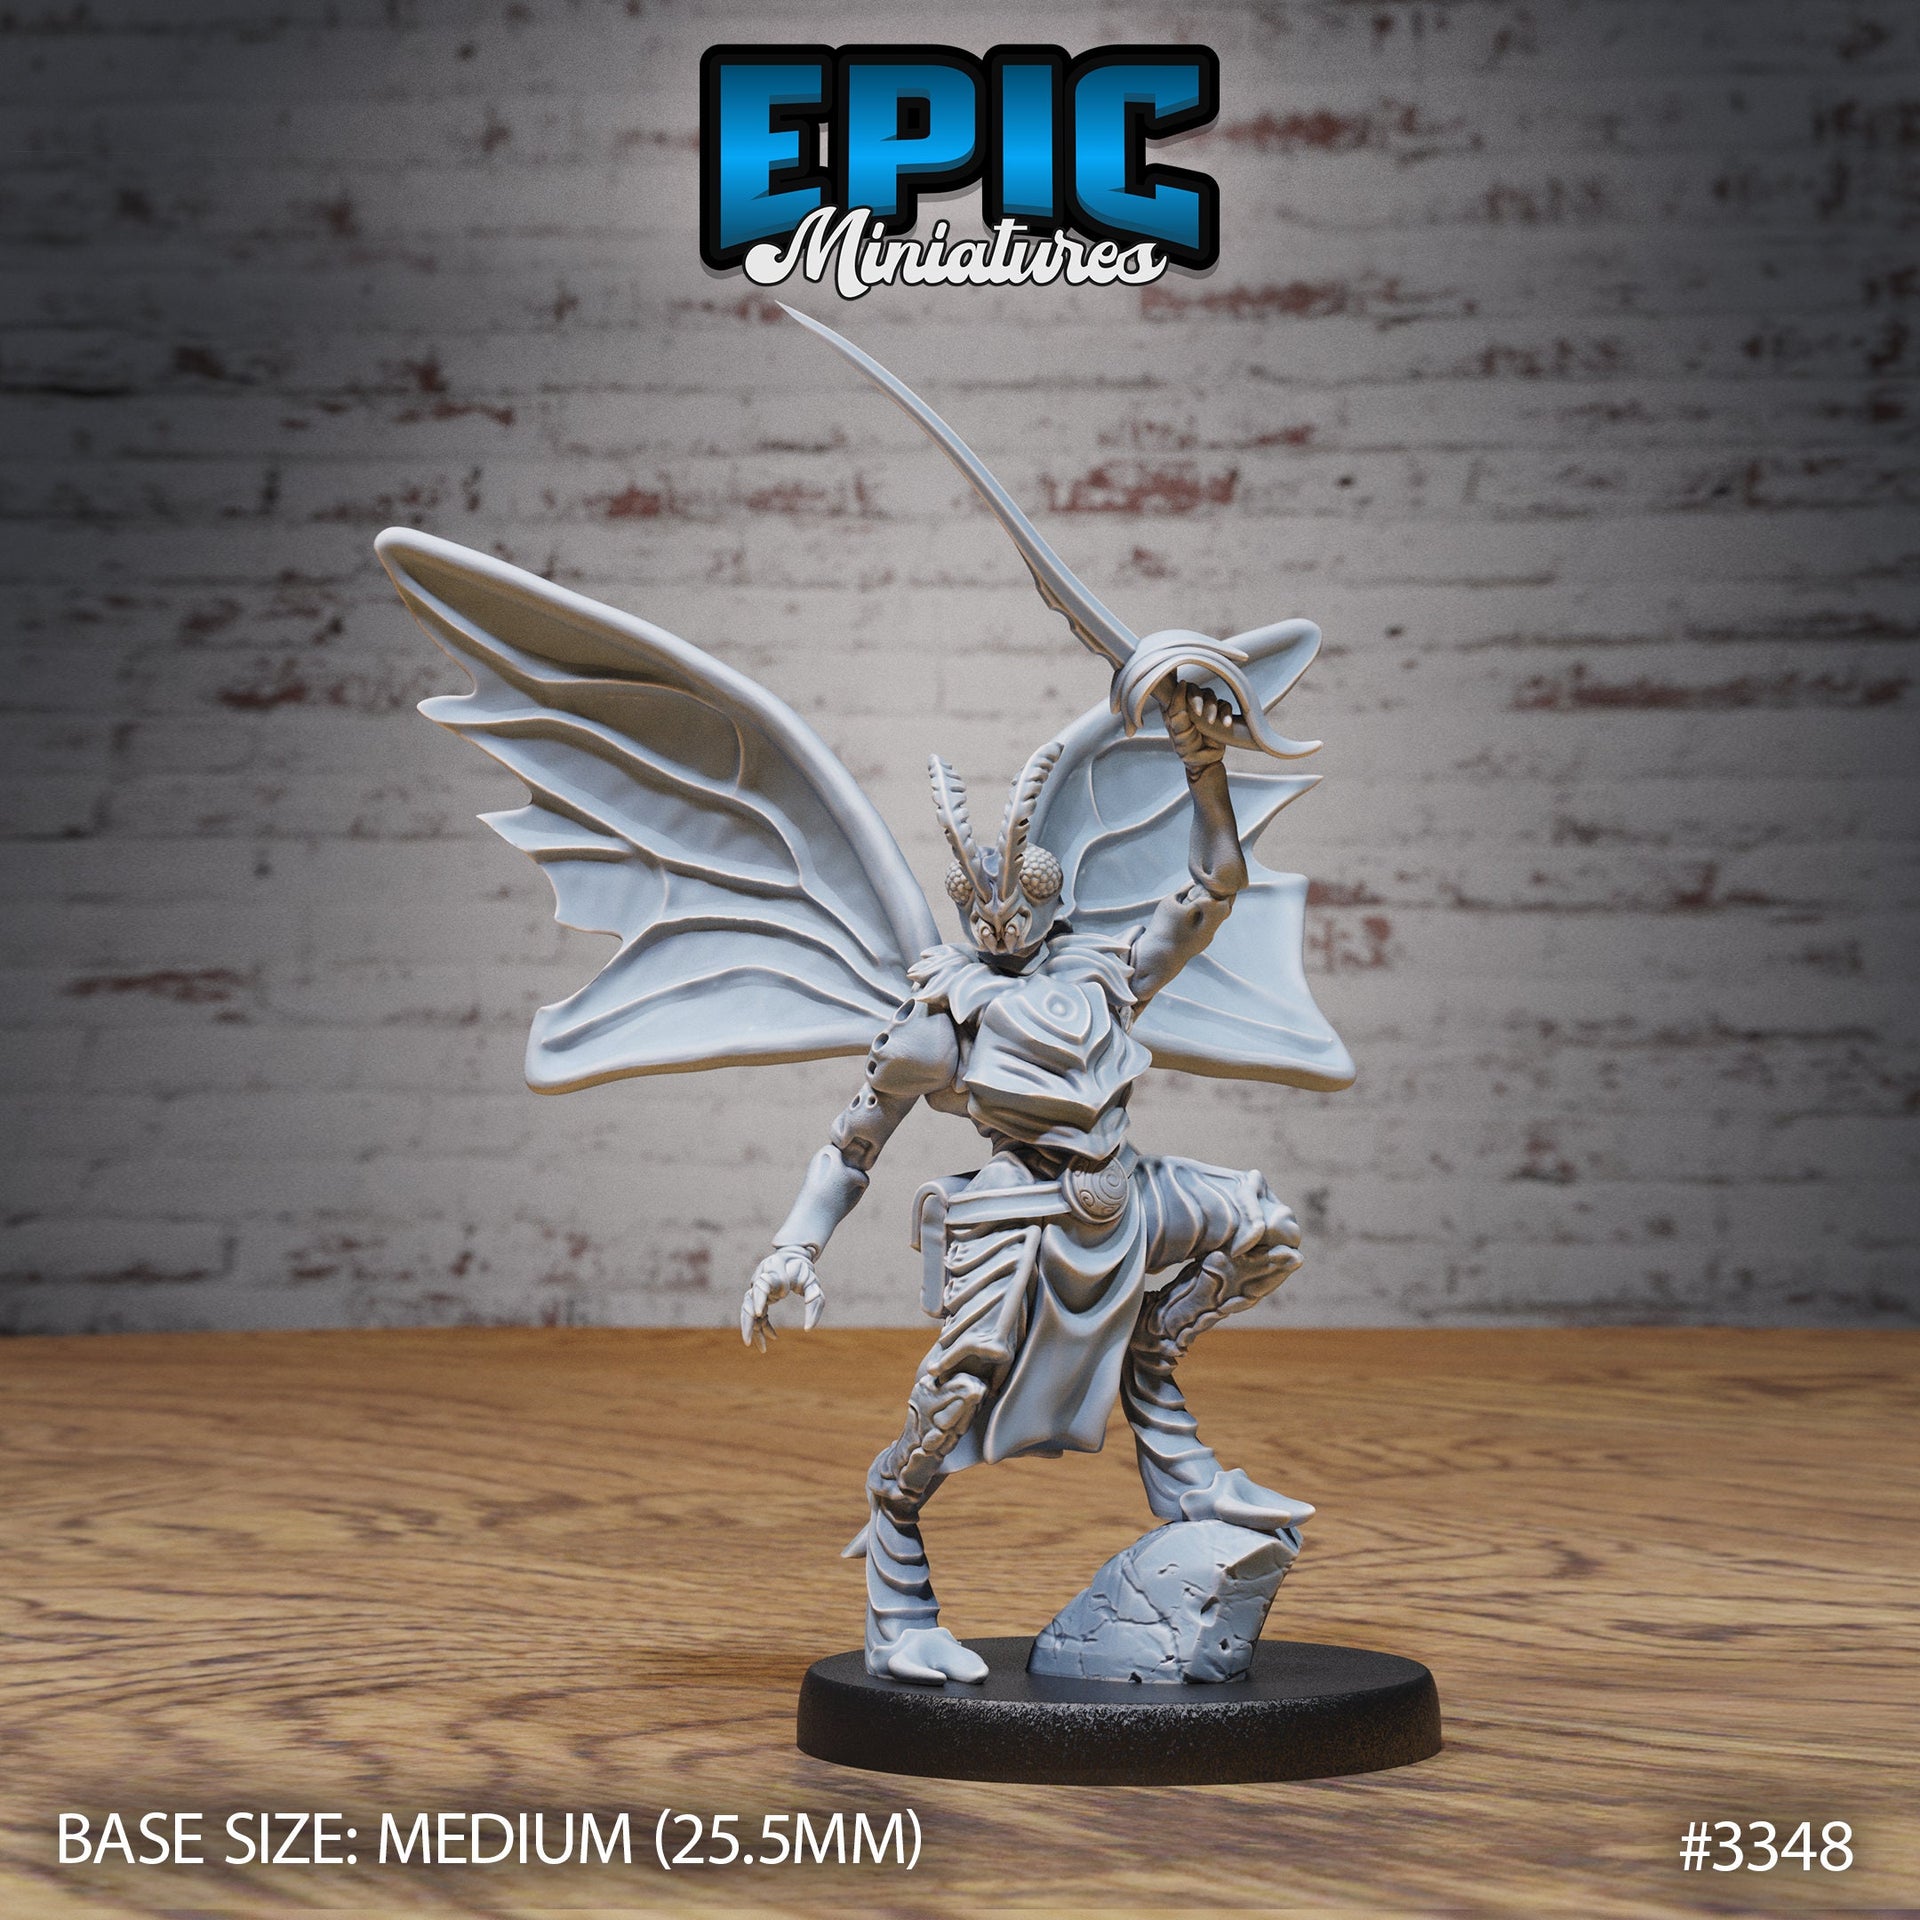 Moth Folk Warrior - Epic Miniatures | 32mm | Insectoid Jungle | Bug | bugfolk | Scout | Rogue | Fighter